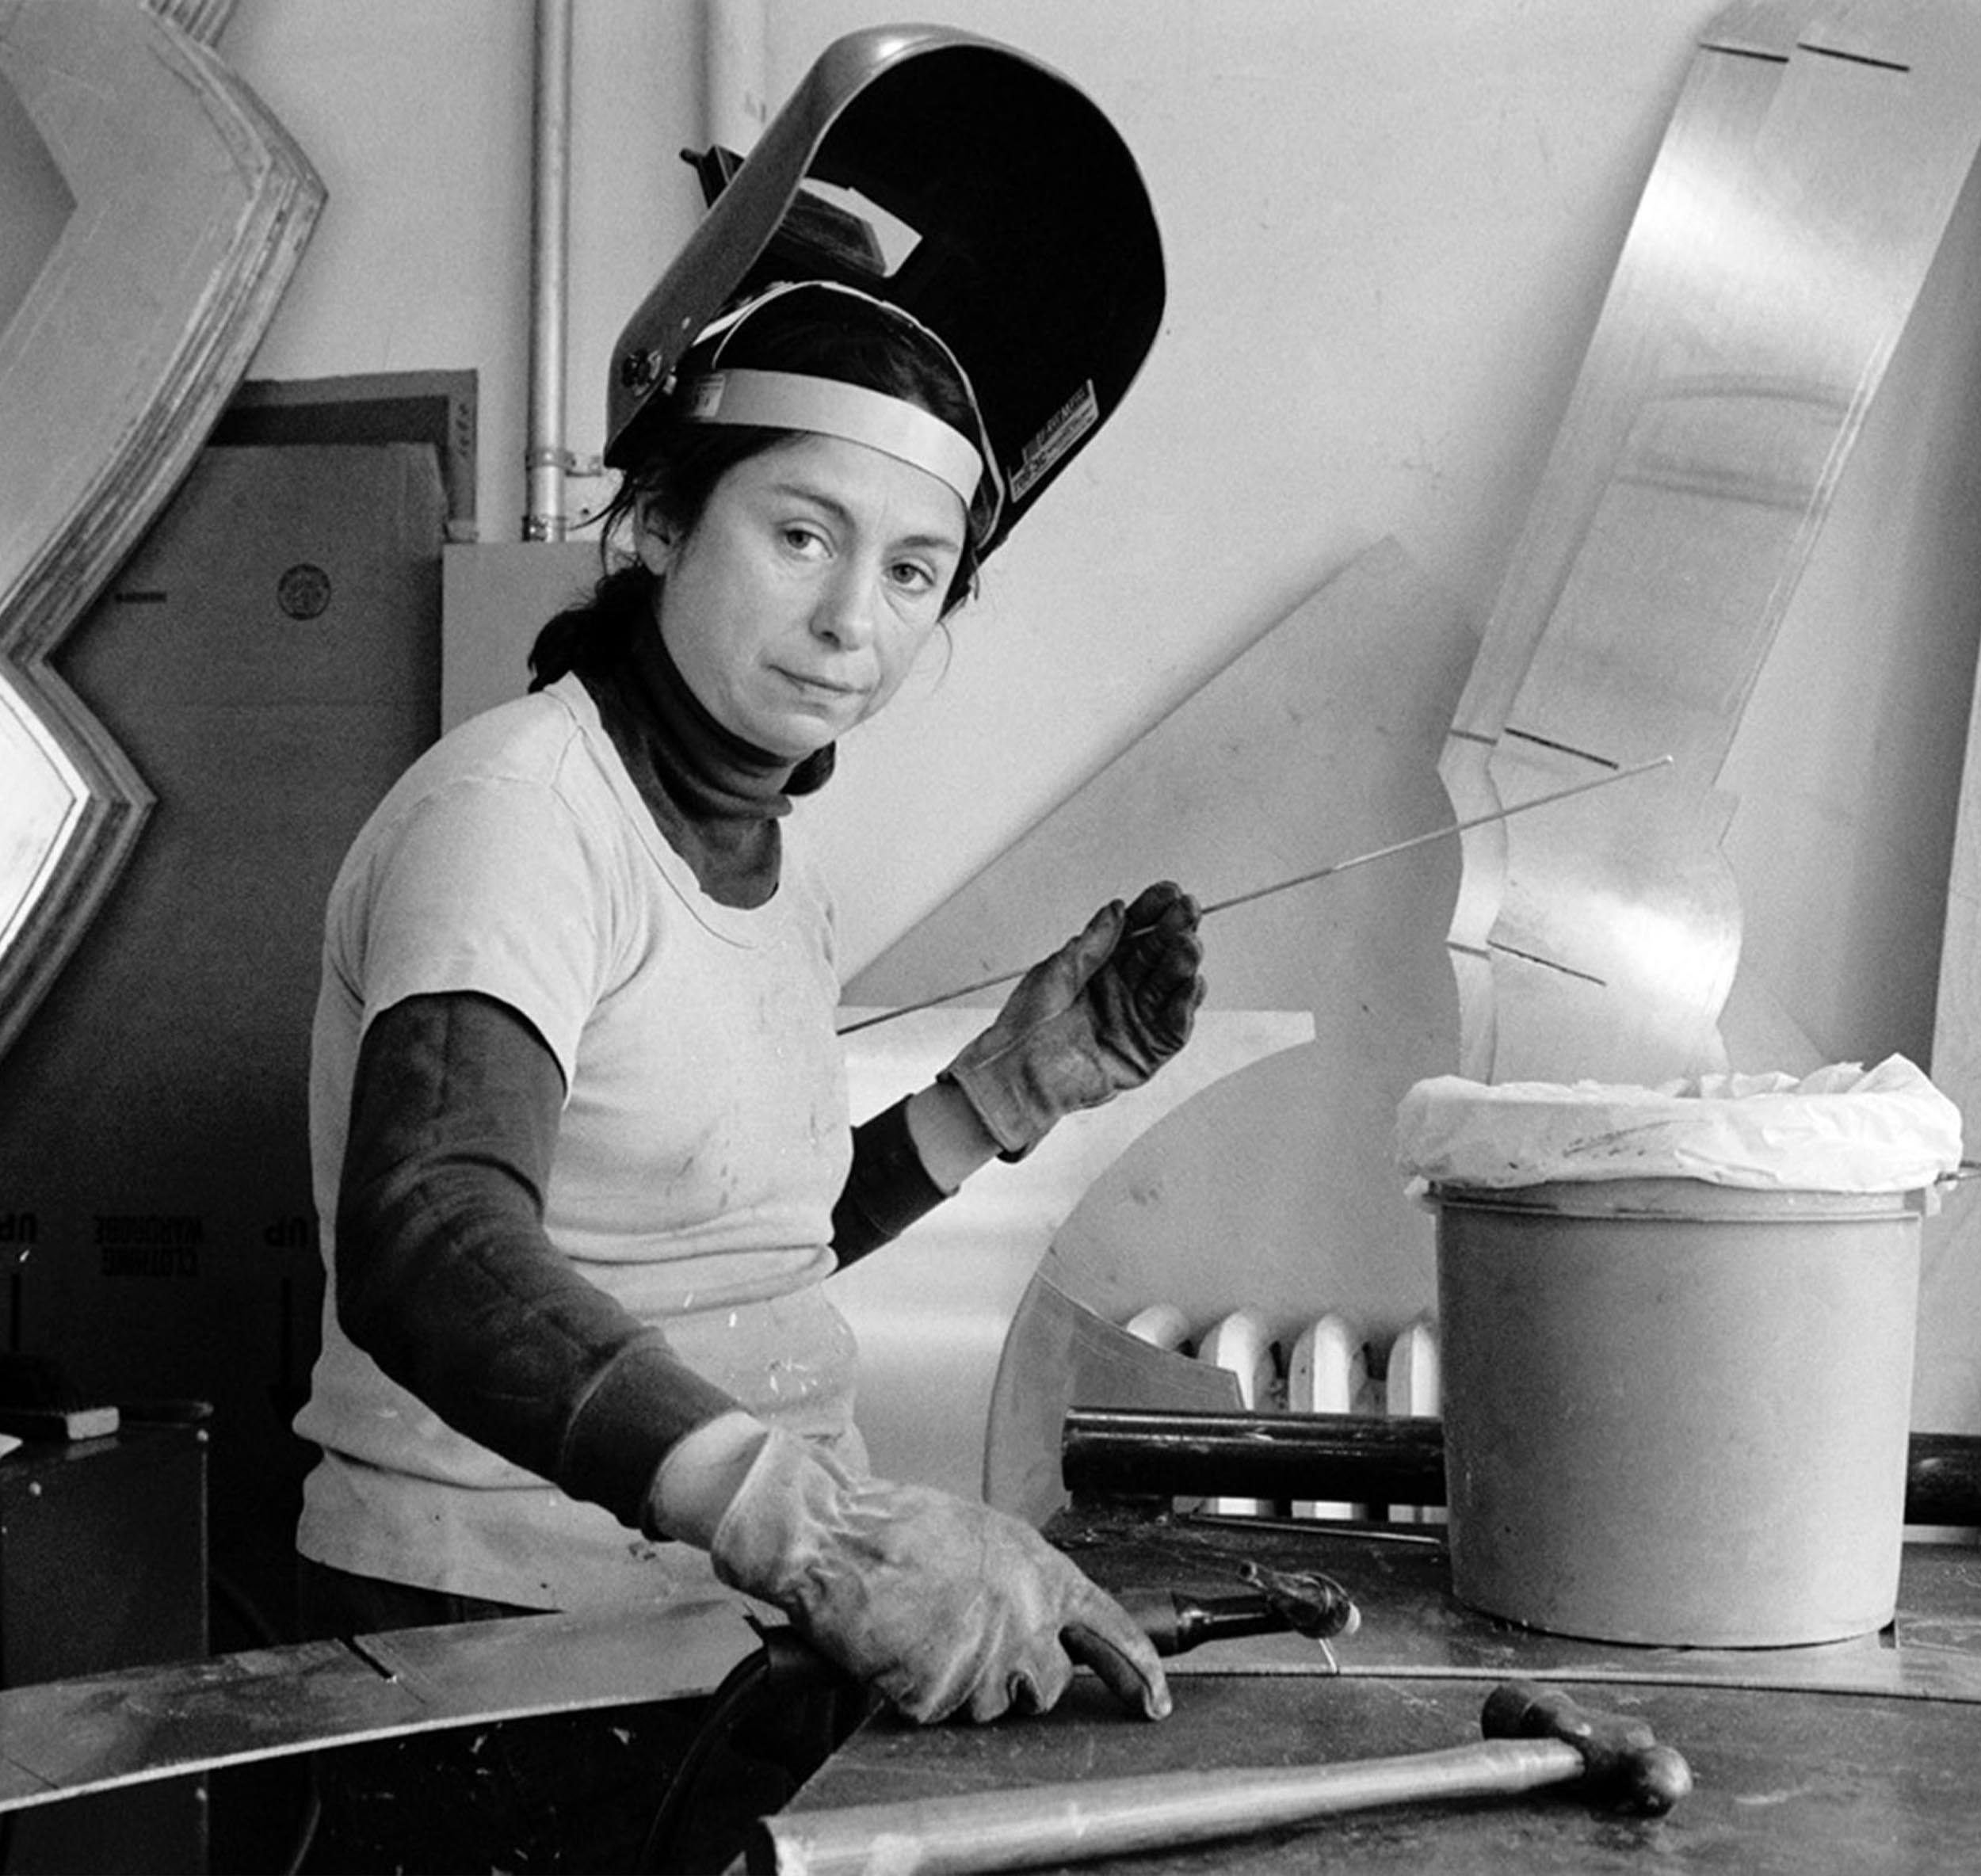 Black and white photograph of Mary Ann Unger at work on her sculpture, wearing work gloves and welder's helmet.